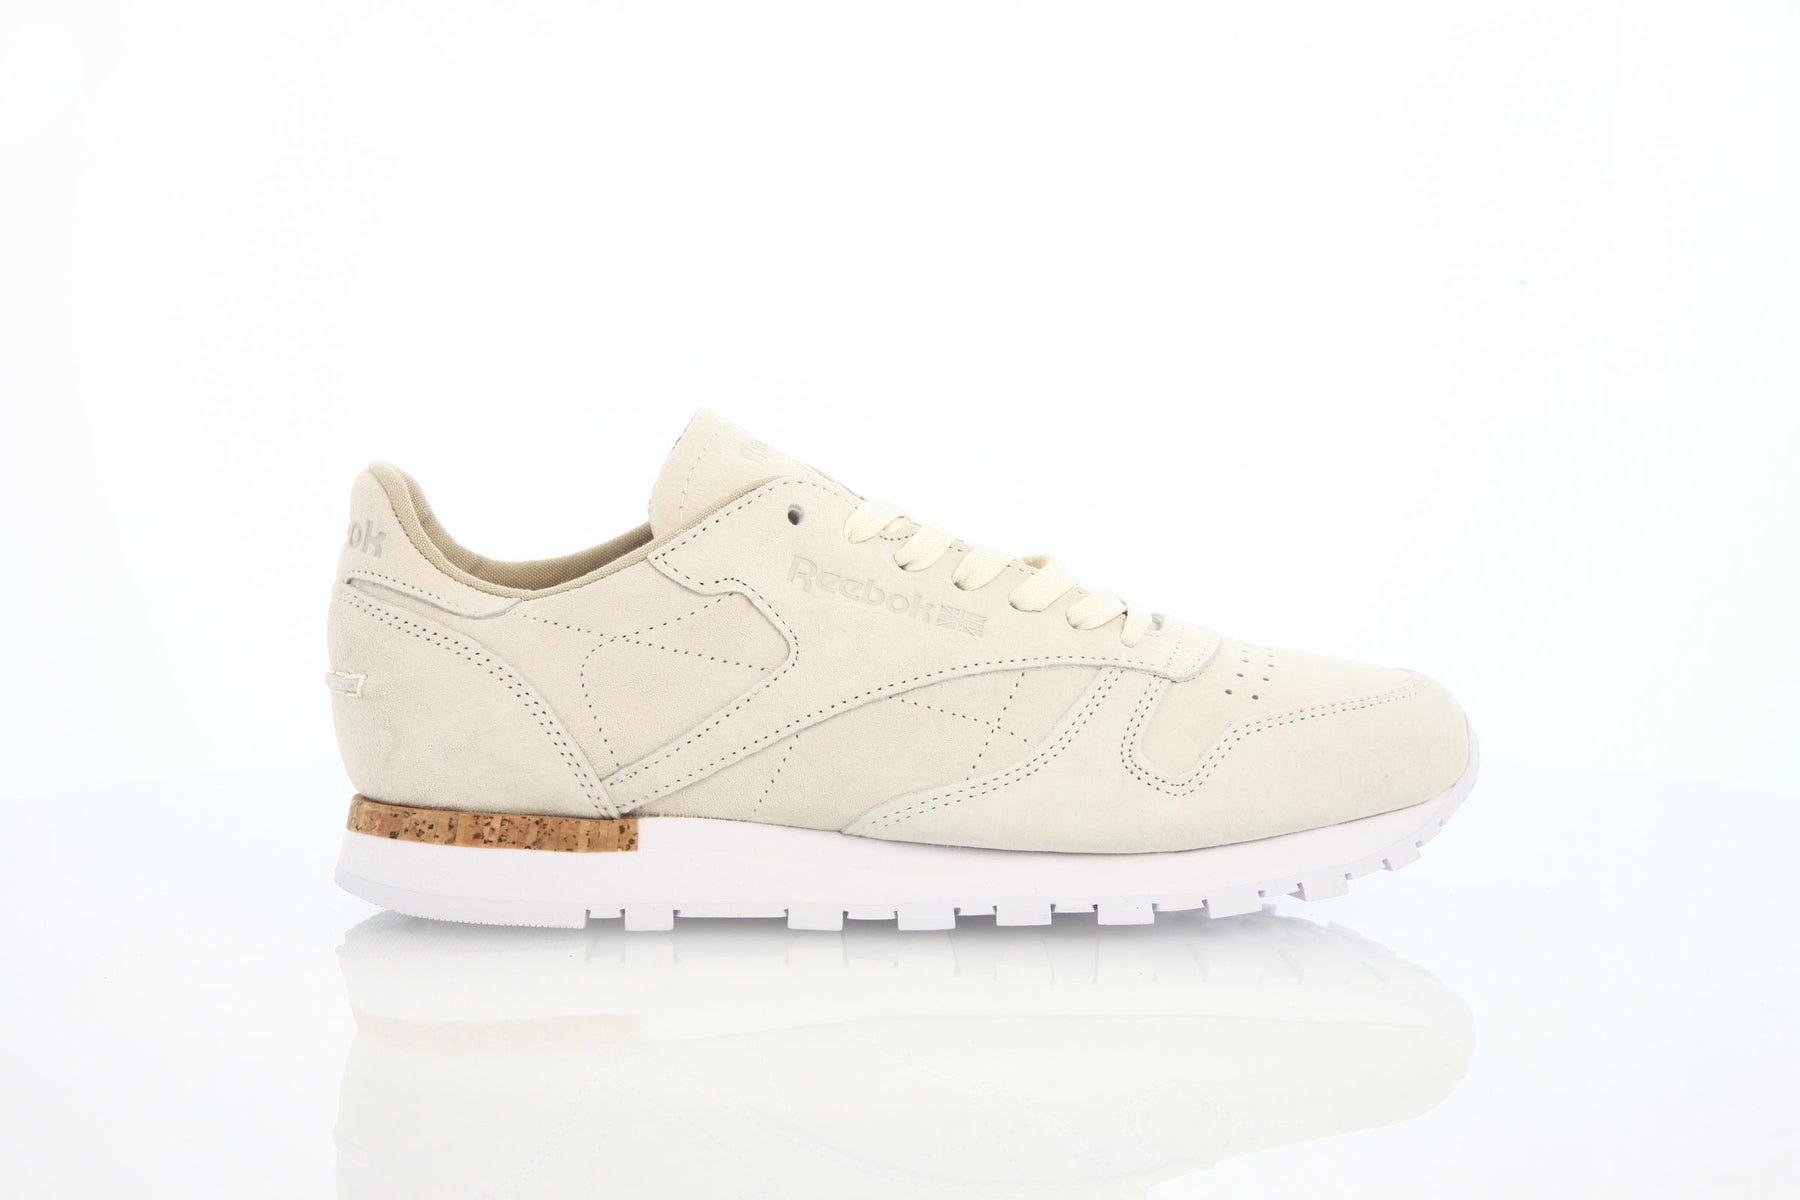 Reebok Classic Leather Lst "Classic White"